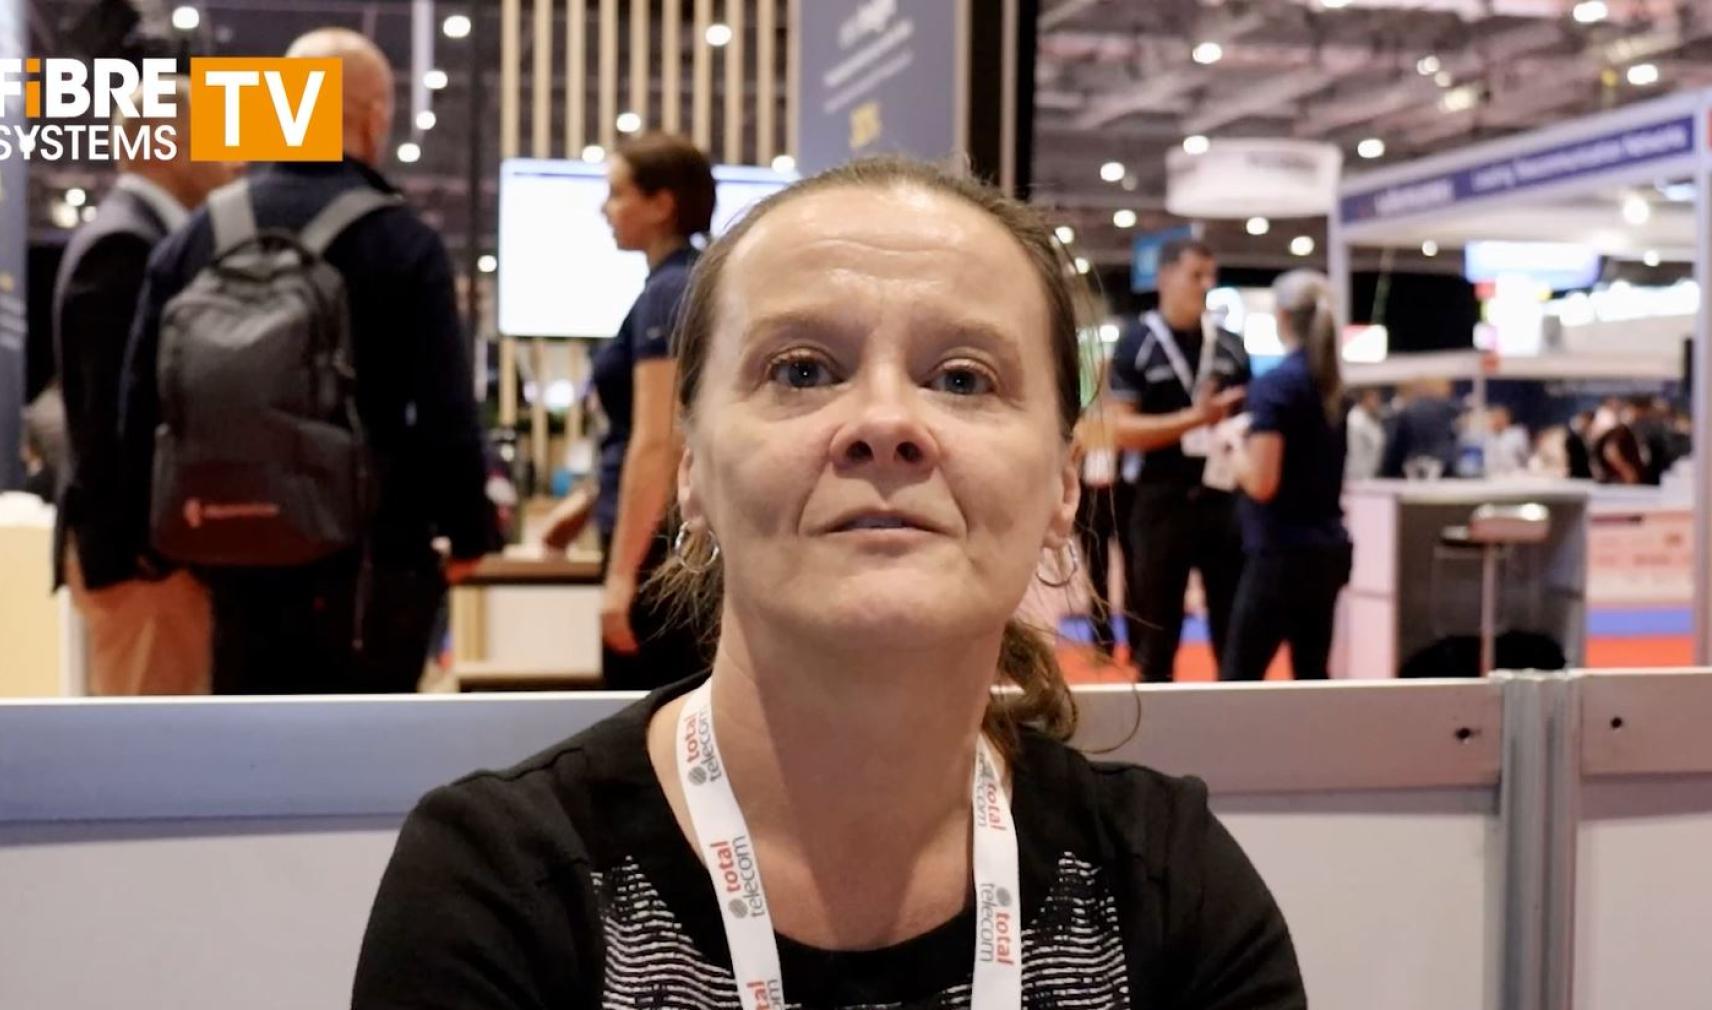 Fibre Systems' Editor Keely Portway shares her views on one of the UK’s leading trade events